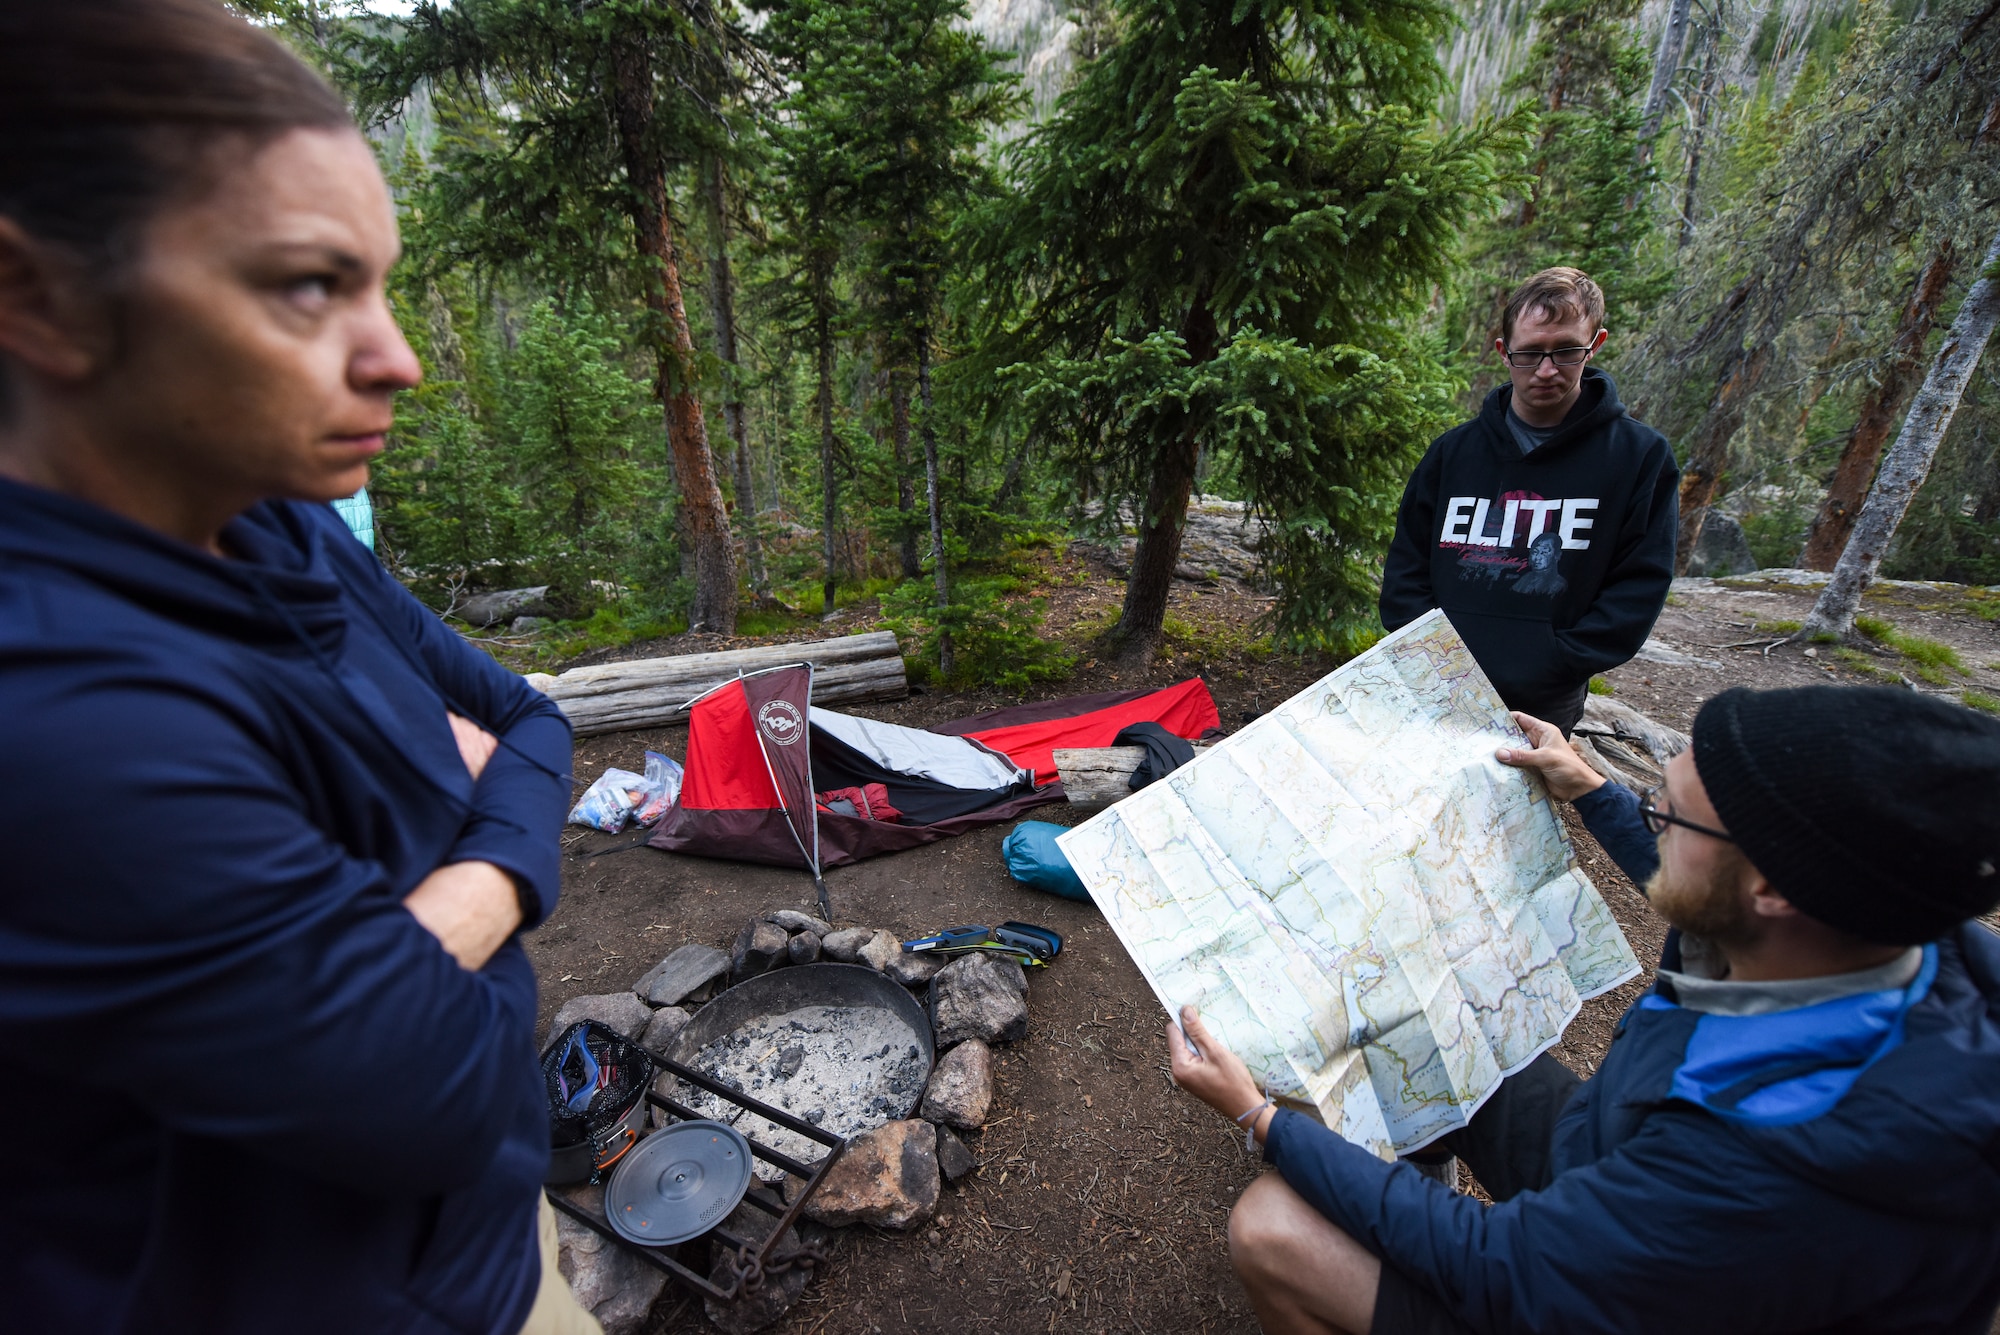 Airmen look at a map during a camping trip in Colorado